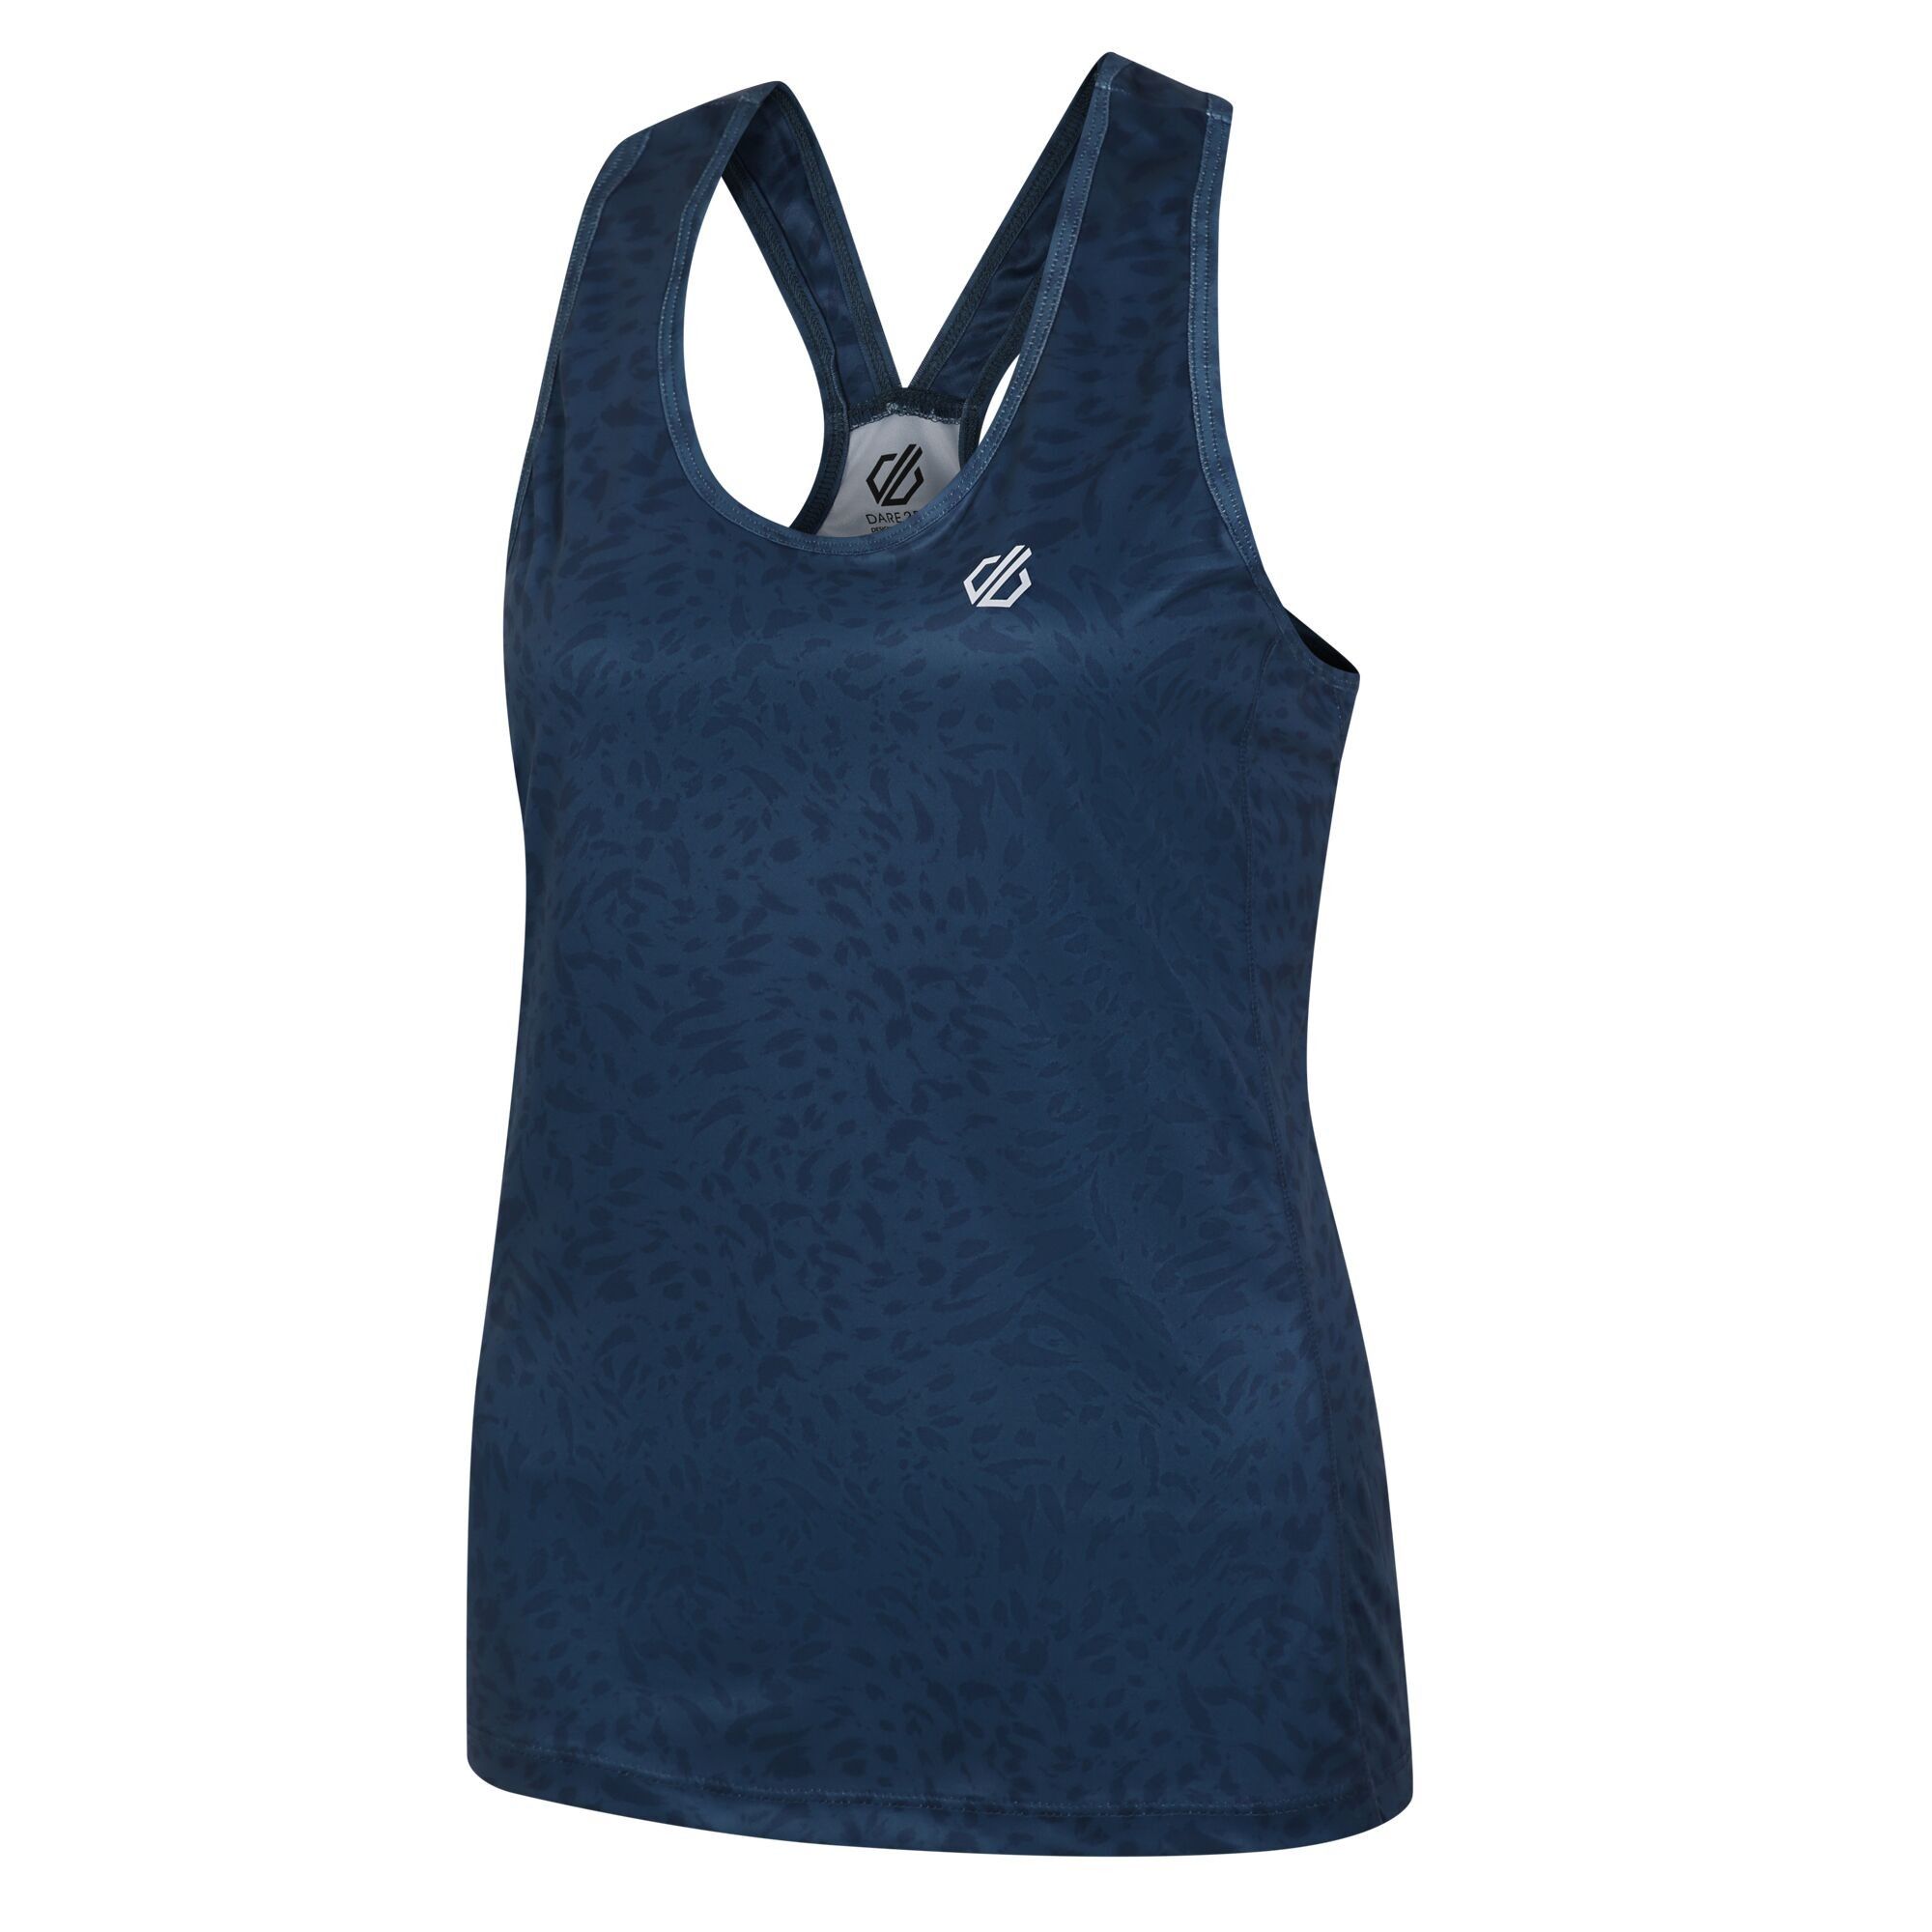 92% Polyester, 8% Elastane. Fabric: Q-Wic, Recycled, Stretch. Design: Logo, Printed. Neckline: Crew Neck. Back Style: Racerback. Sleeve-Type: Sleeveless. Fabric Technology: Anti-Bacterial, Lightweight, Moisture Wicking, Odour Control, Quick Dry. Reflective Detail. Sustainability: Made from Recycled Materials.